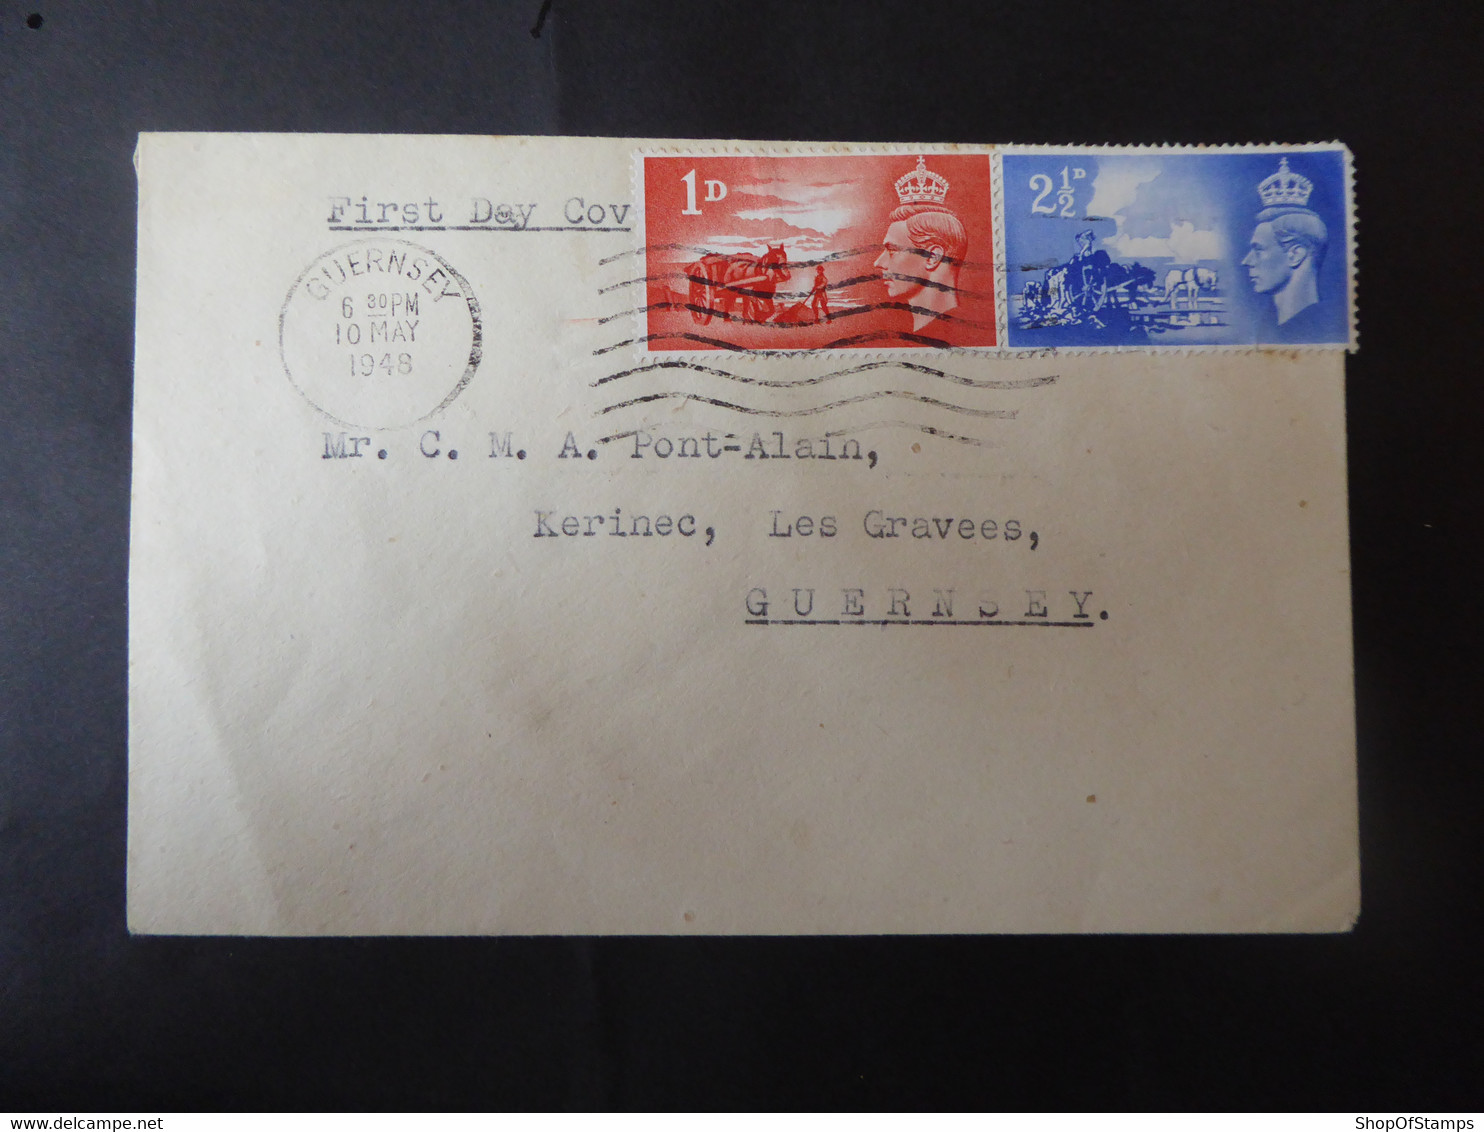 CHANNEL ISLANDS SG C1-2 FDC WITH POSTMARK GUERNSEY 10 MAY 1942 - Sin Clasificación